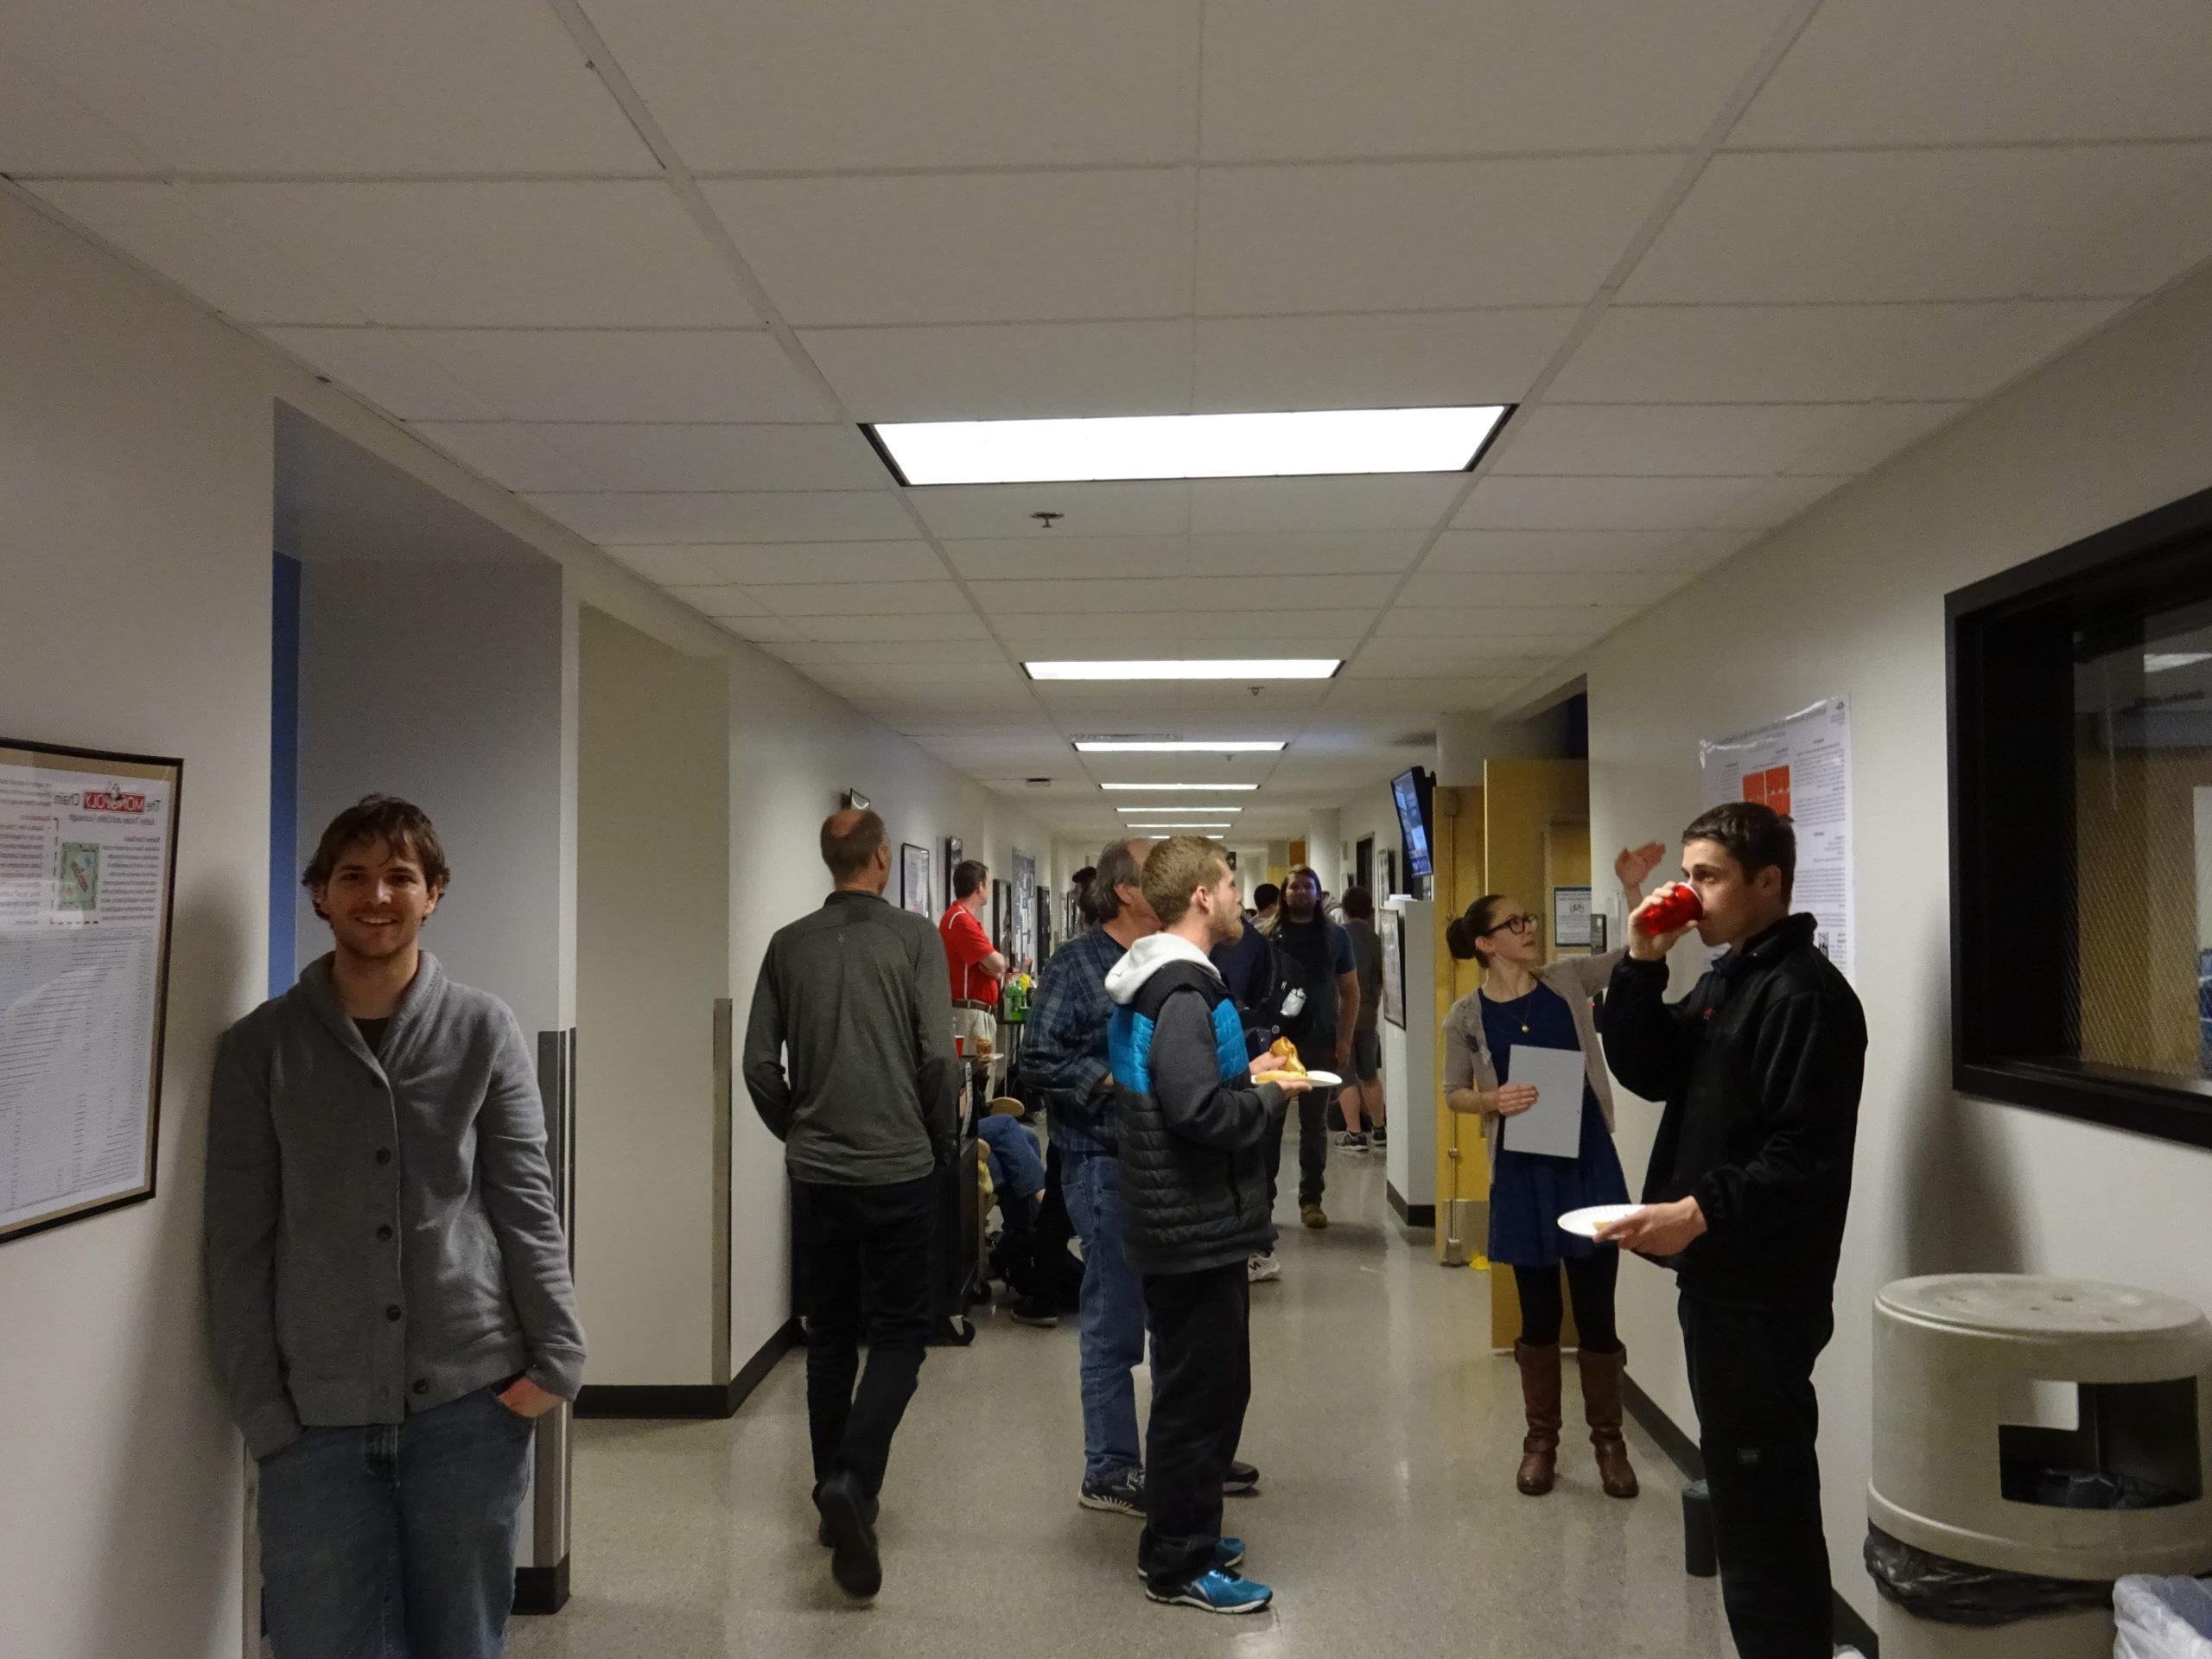 Students standing in the hallway in the Science Building